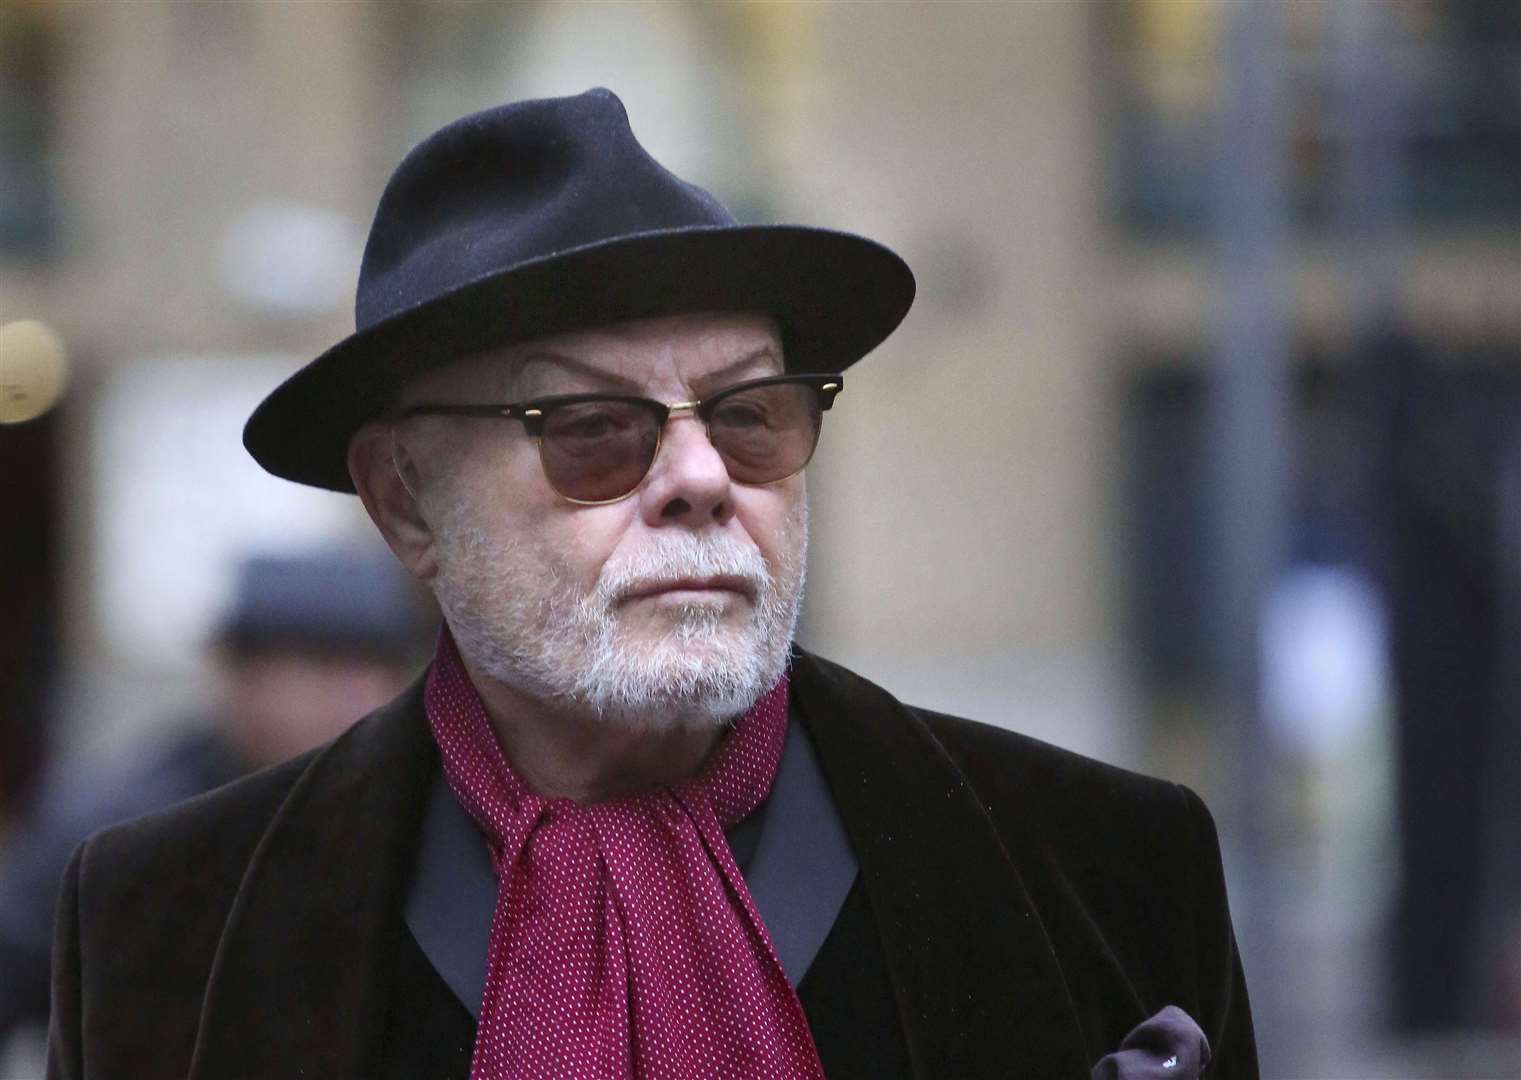 Disgraced pop star Gary Glitter, whose real name is Paul Gadd, pictured in 2015 (PA)